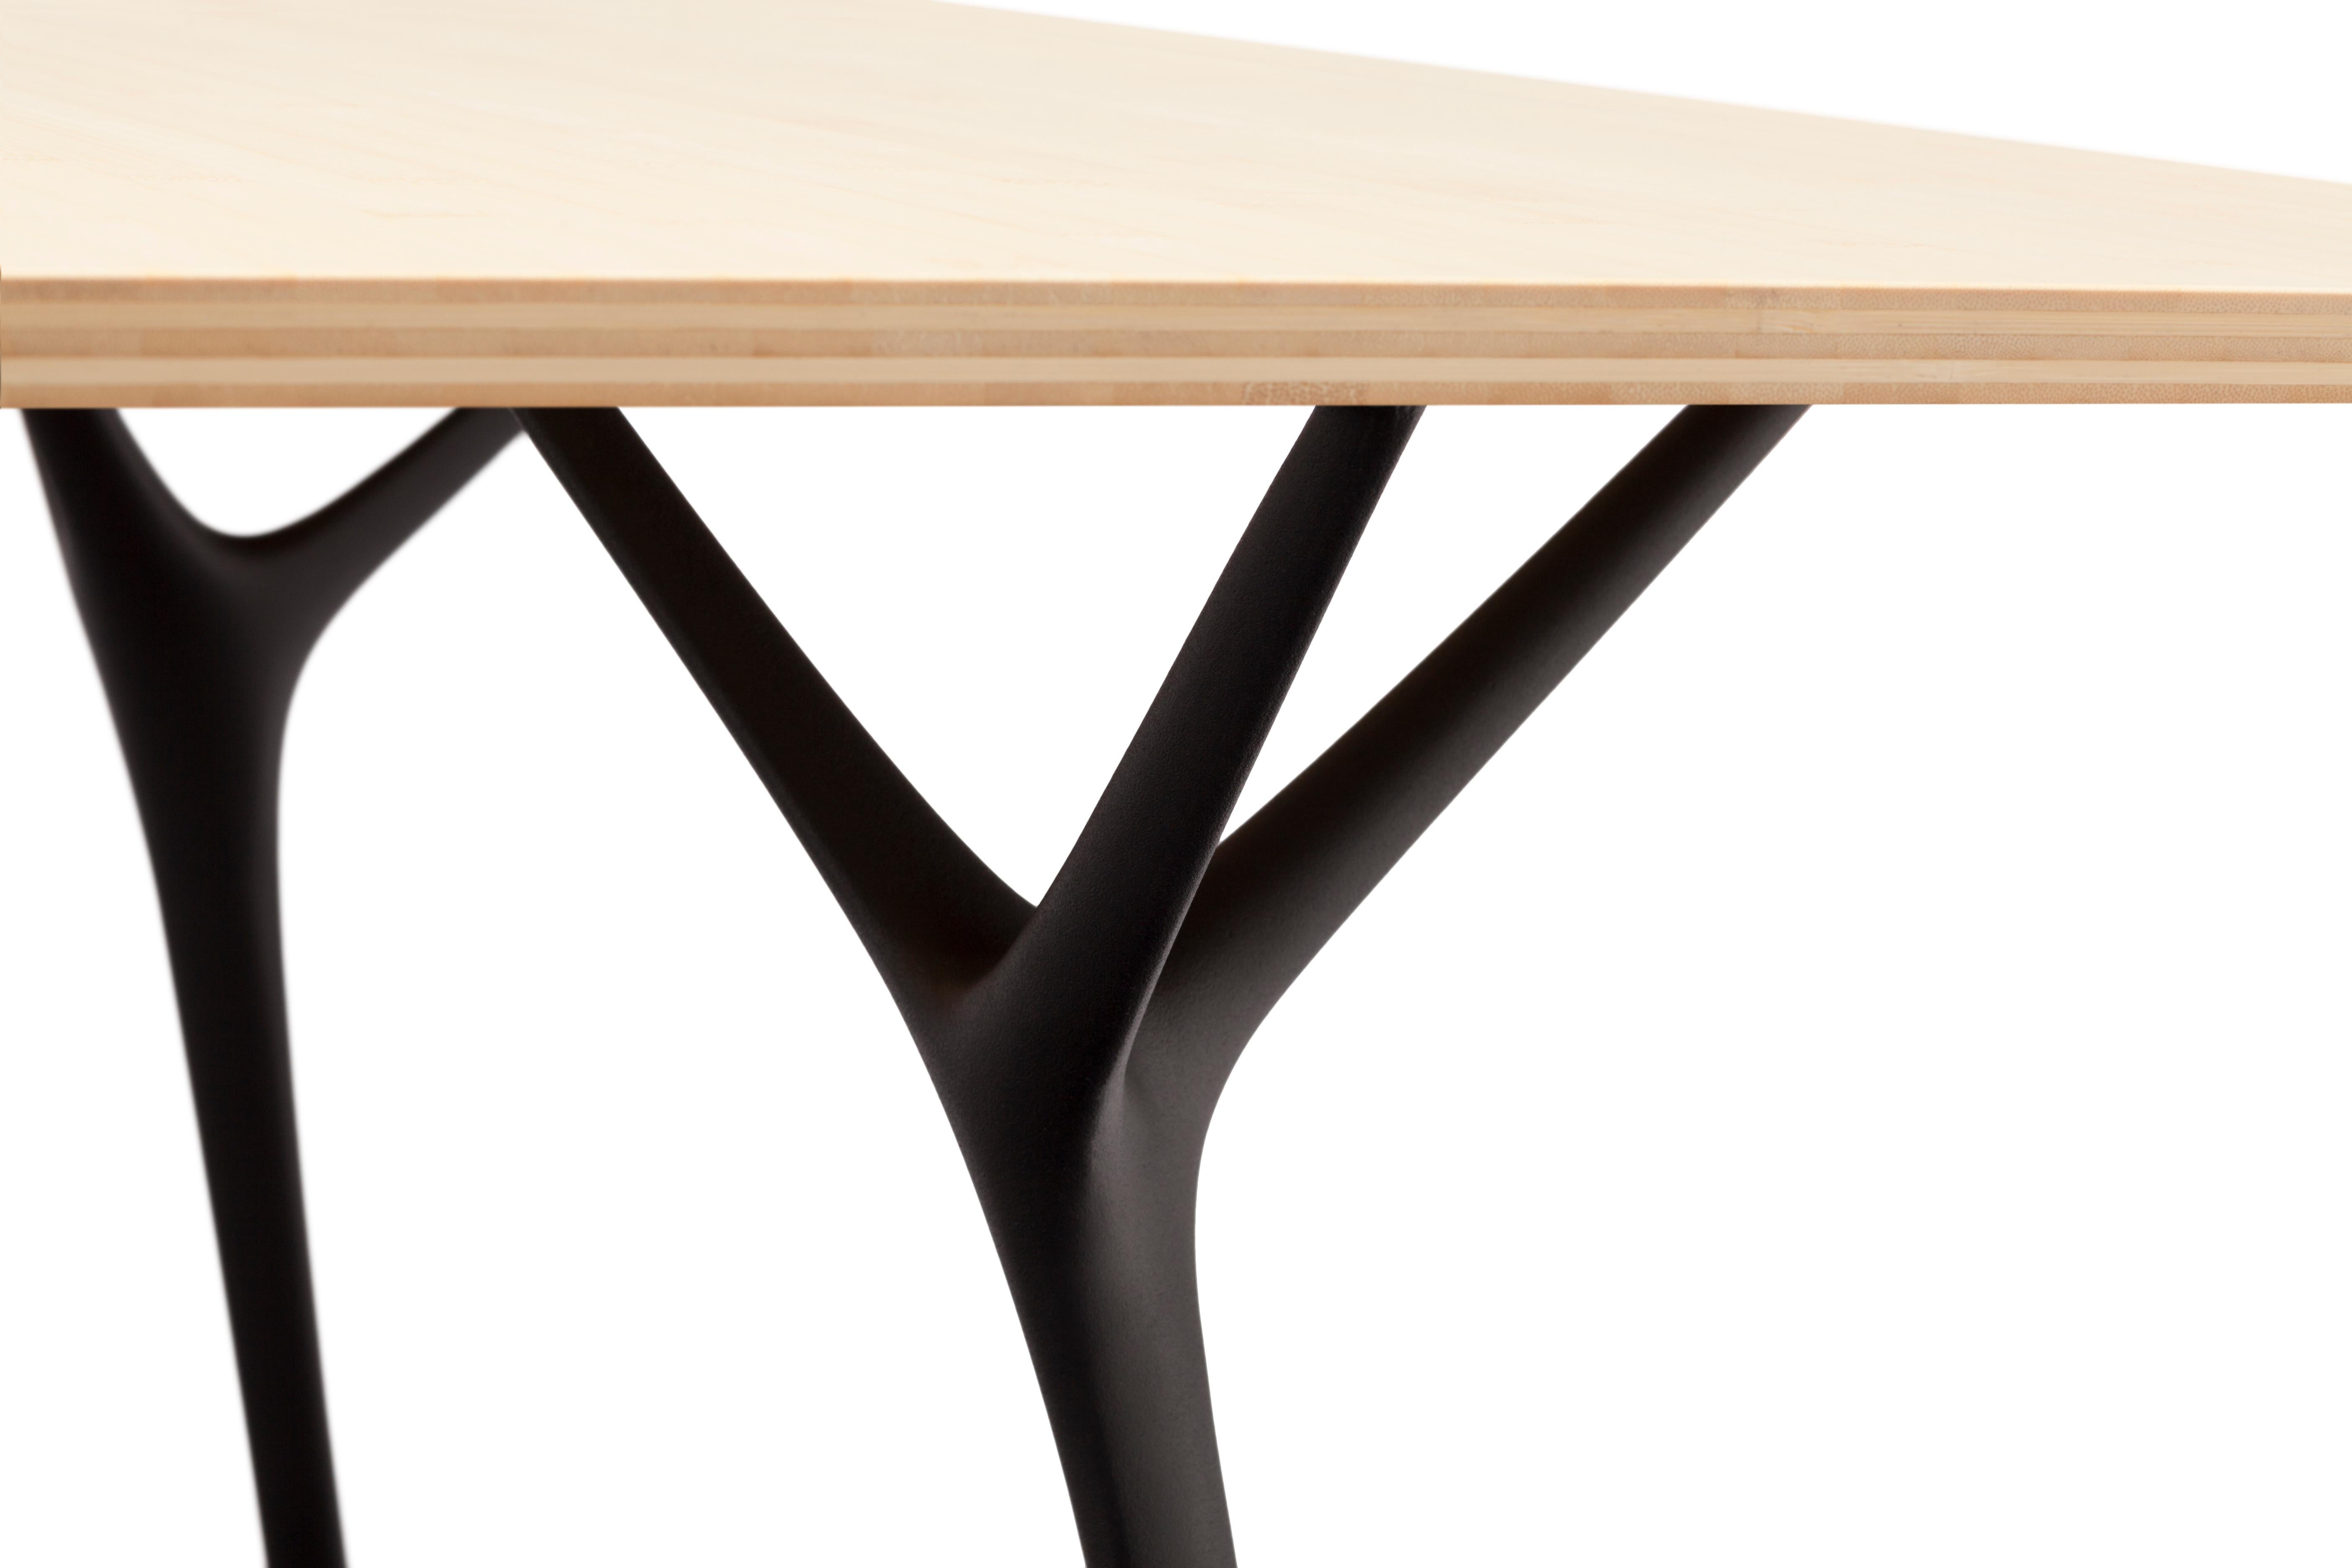 Minimalist Stellarnova, Recycled Cast Aluminum Legs & Bamboo Dining Table by Made in Ratio